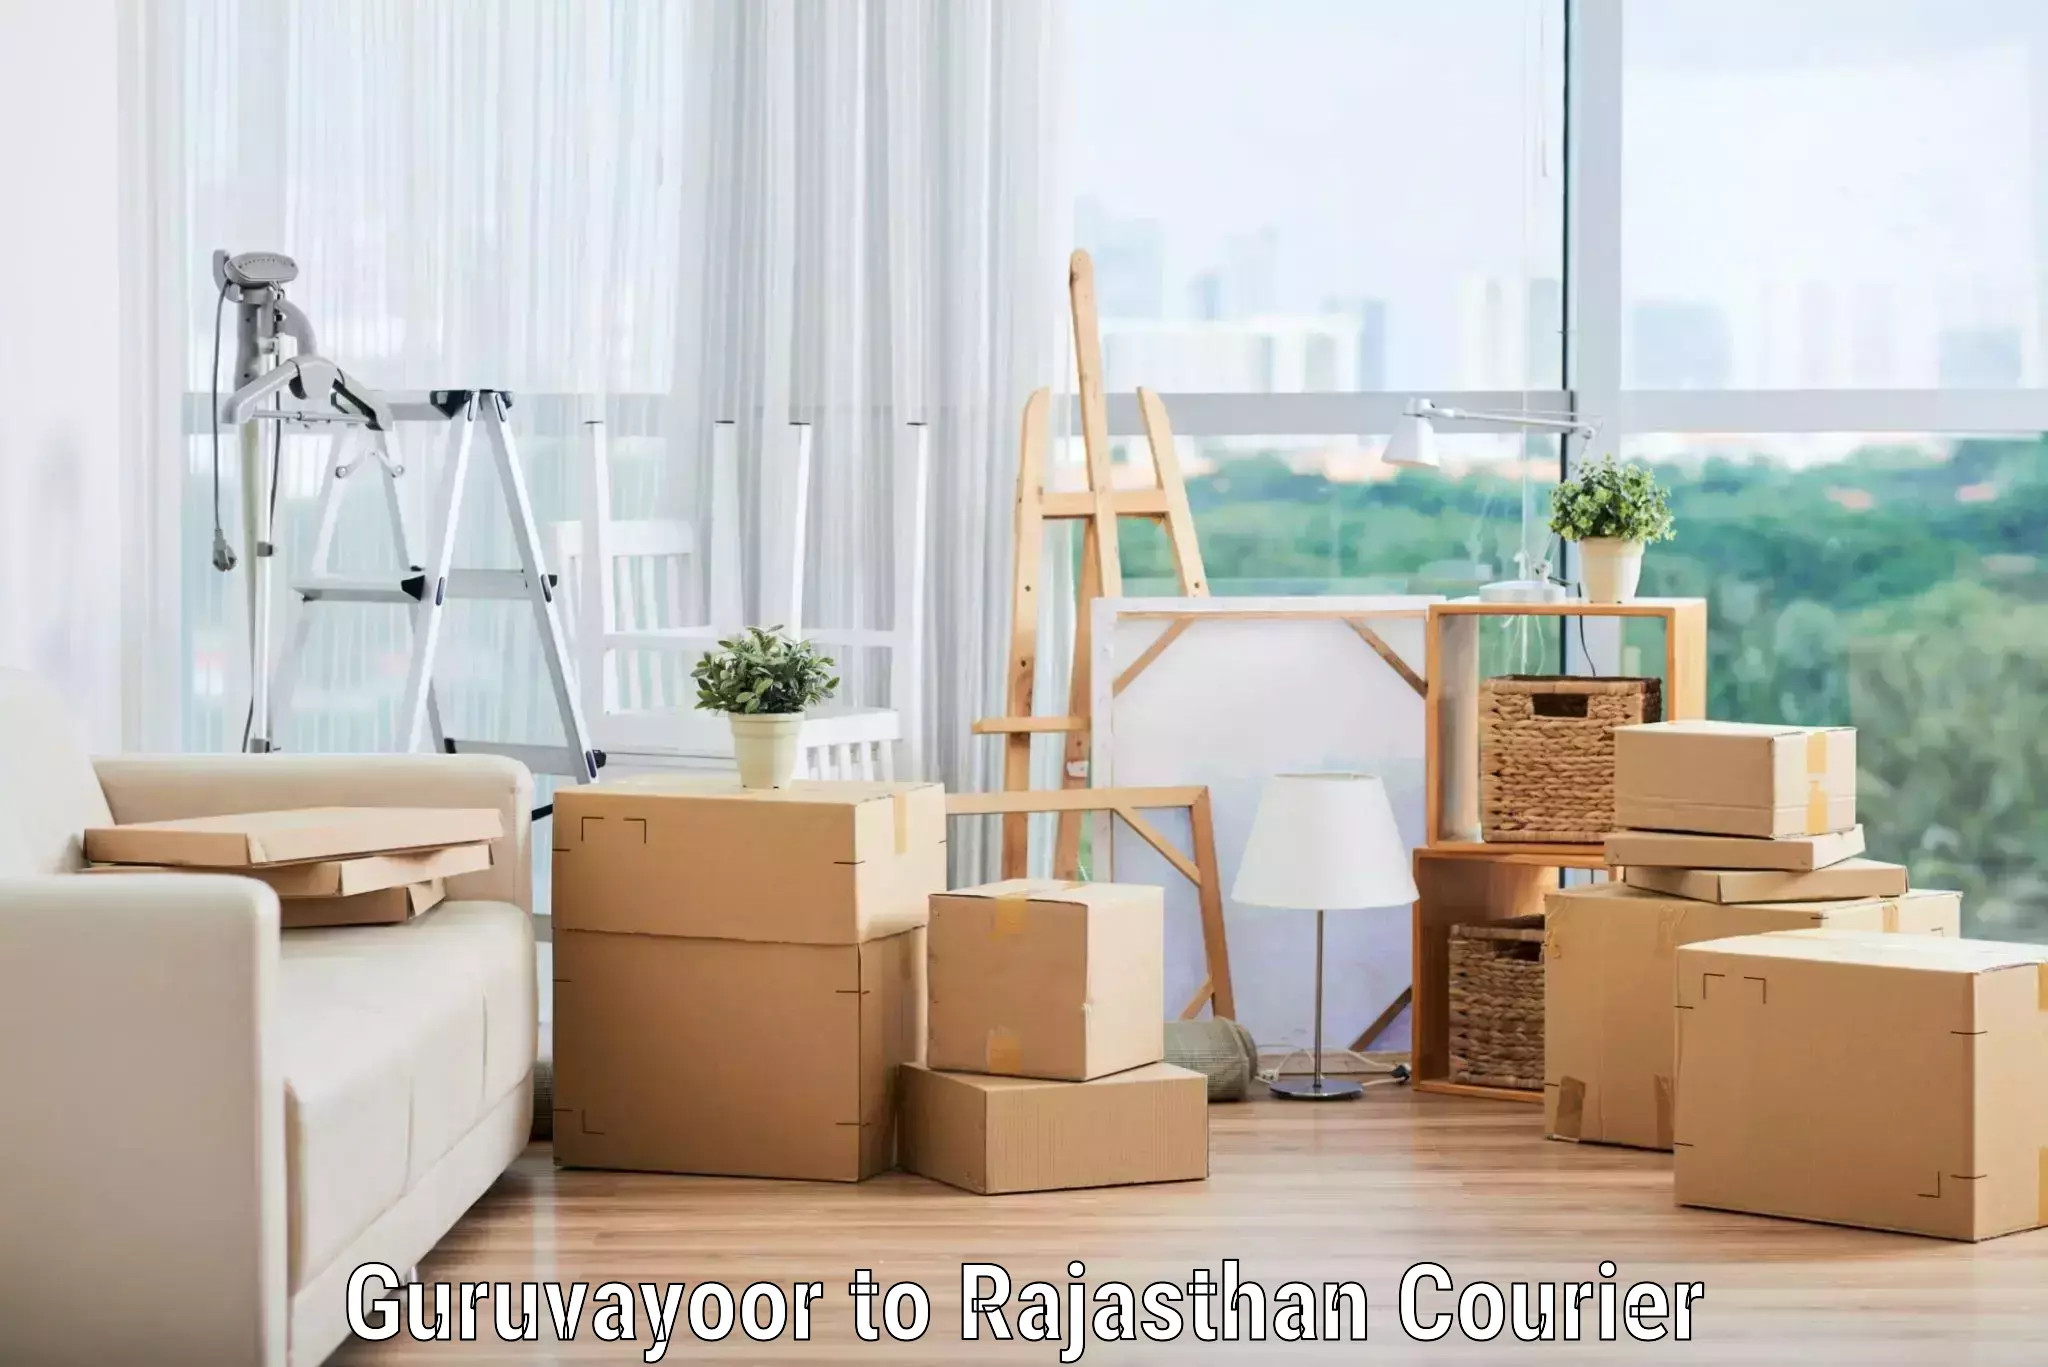 Reliable relocation services in Guruvayoor to Rajasthan